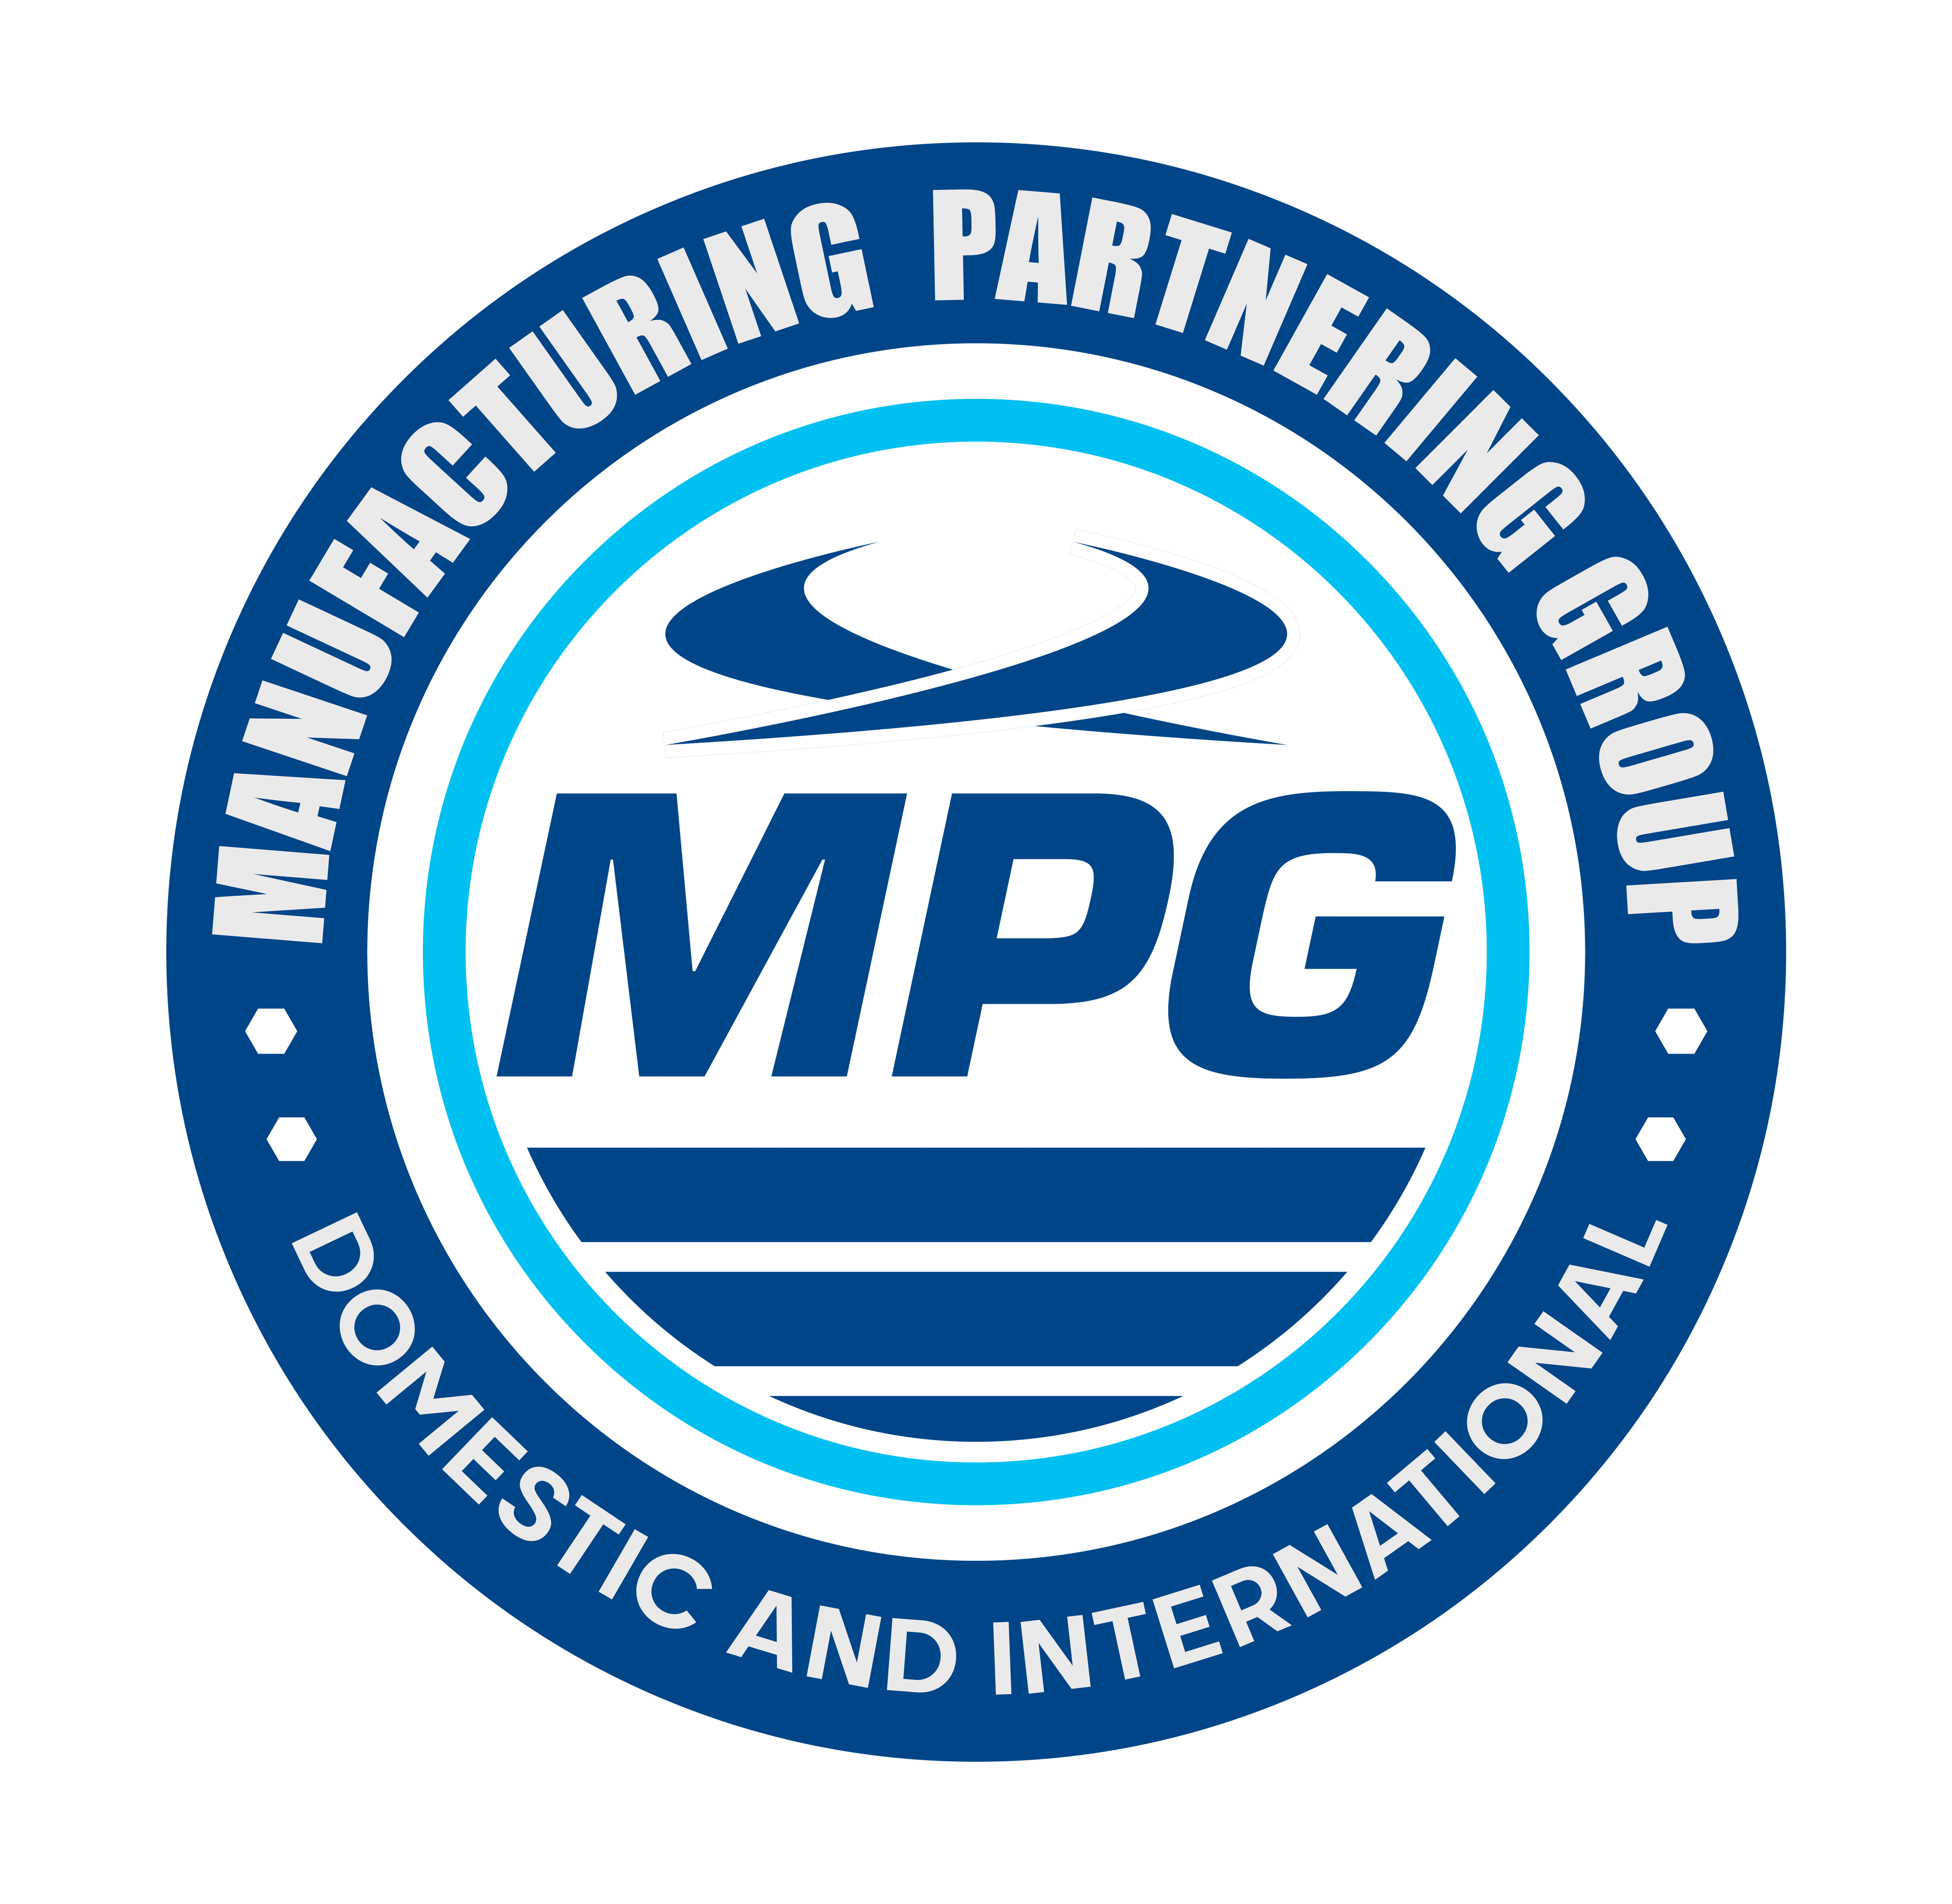 About Us – MPG Partnering